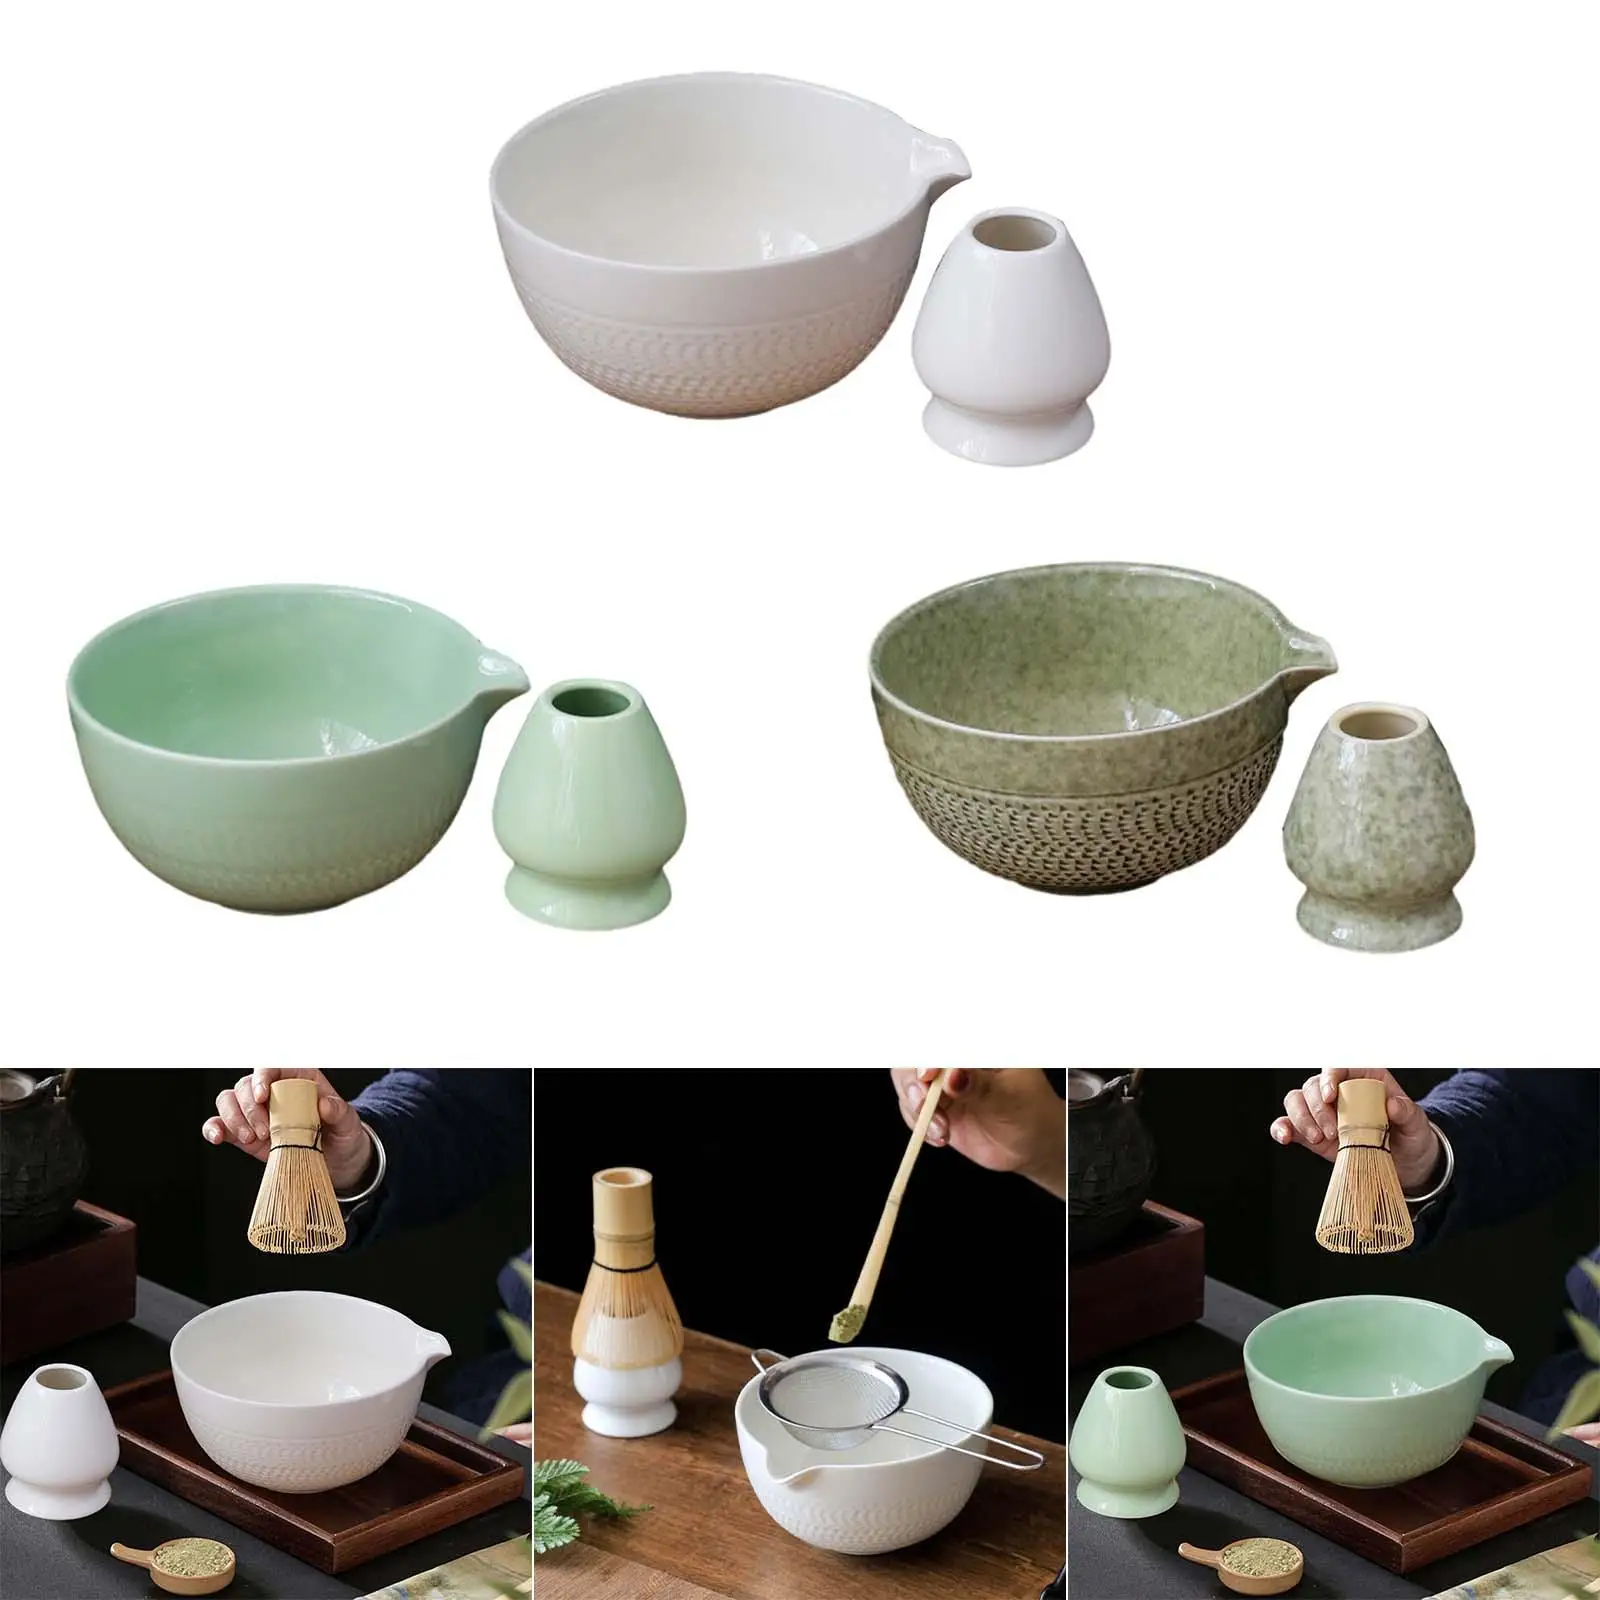 

2 Pieces Ceramic Matcha Bowls with Whisk Holder Tea Bowl with Pouring Spout for Traditional Ceremonial Home Bedroom Tea Ceremony